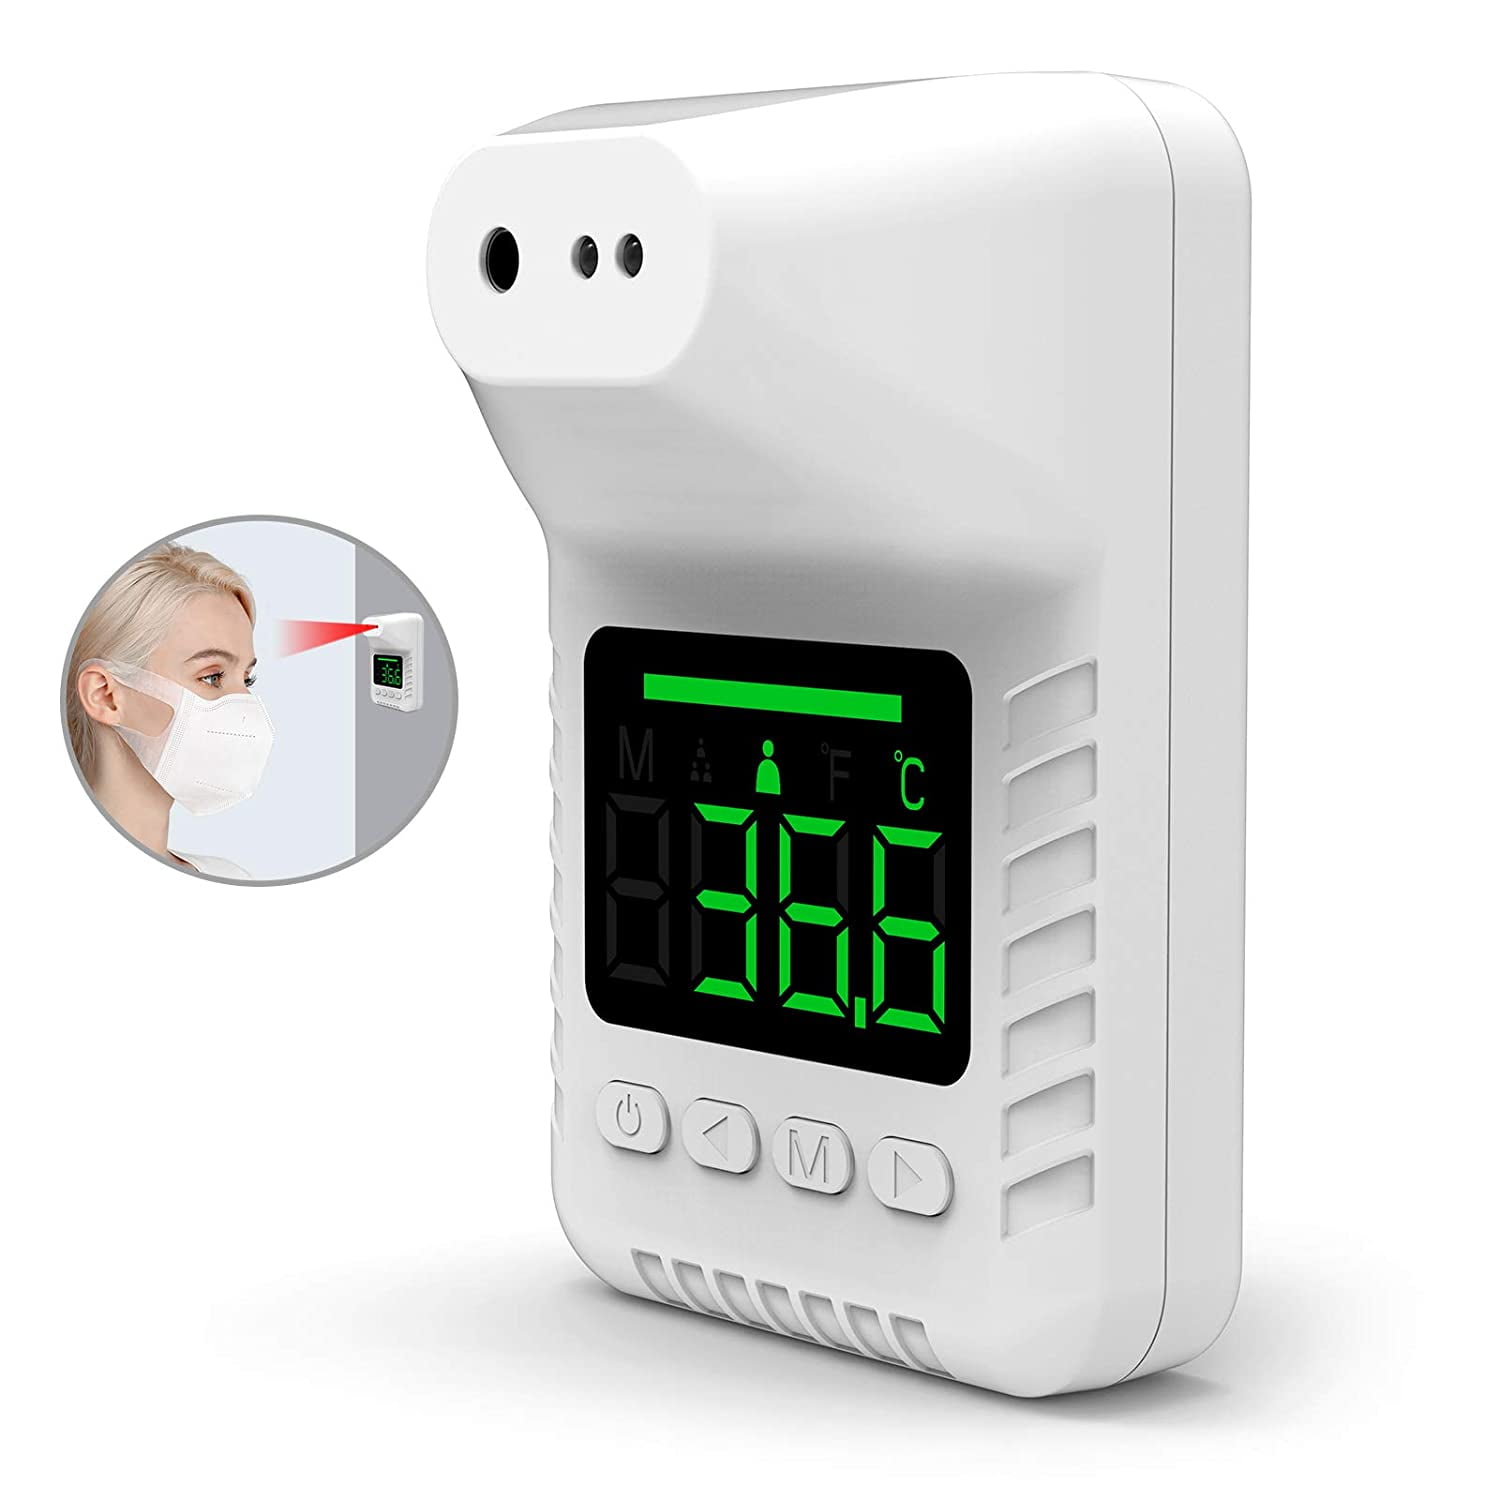 Wall-Mounted Body Thermometer, Industrial Automatic Non-Contact Infrared Thermometer Body Temperature Scanner, 0.5s Quick Test LCD Display Body